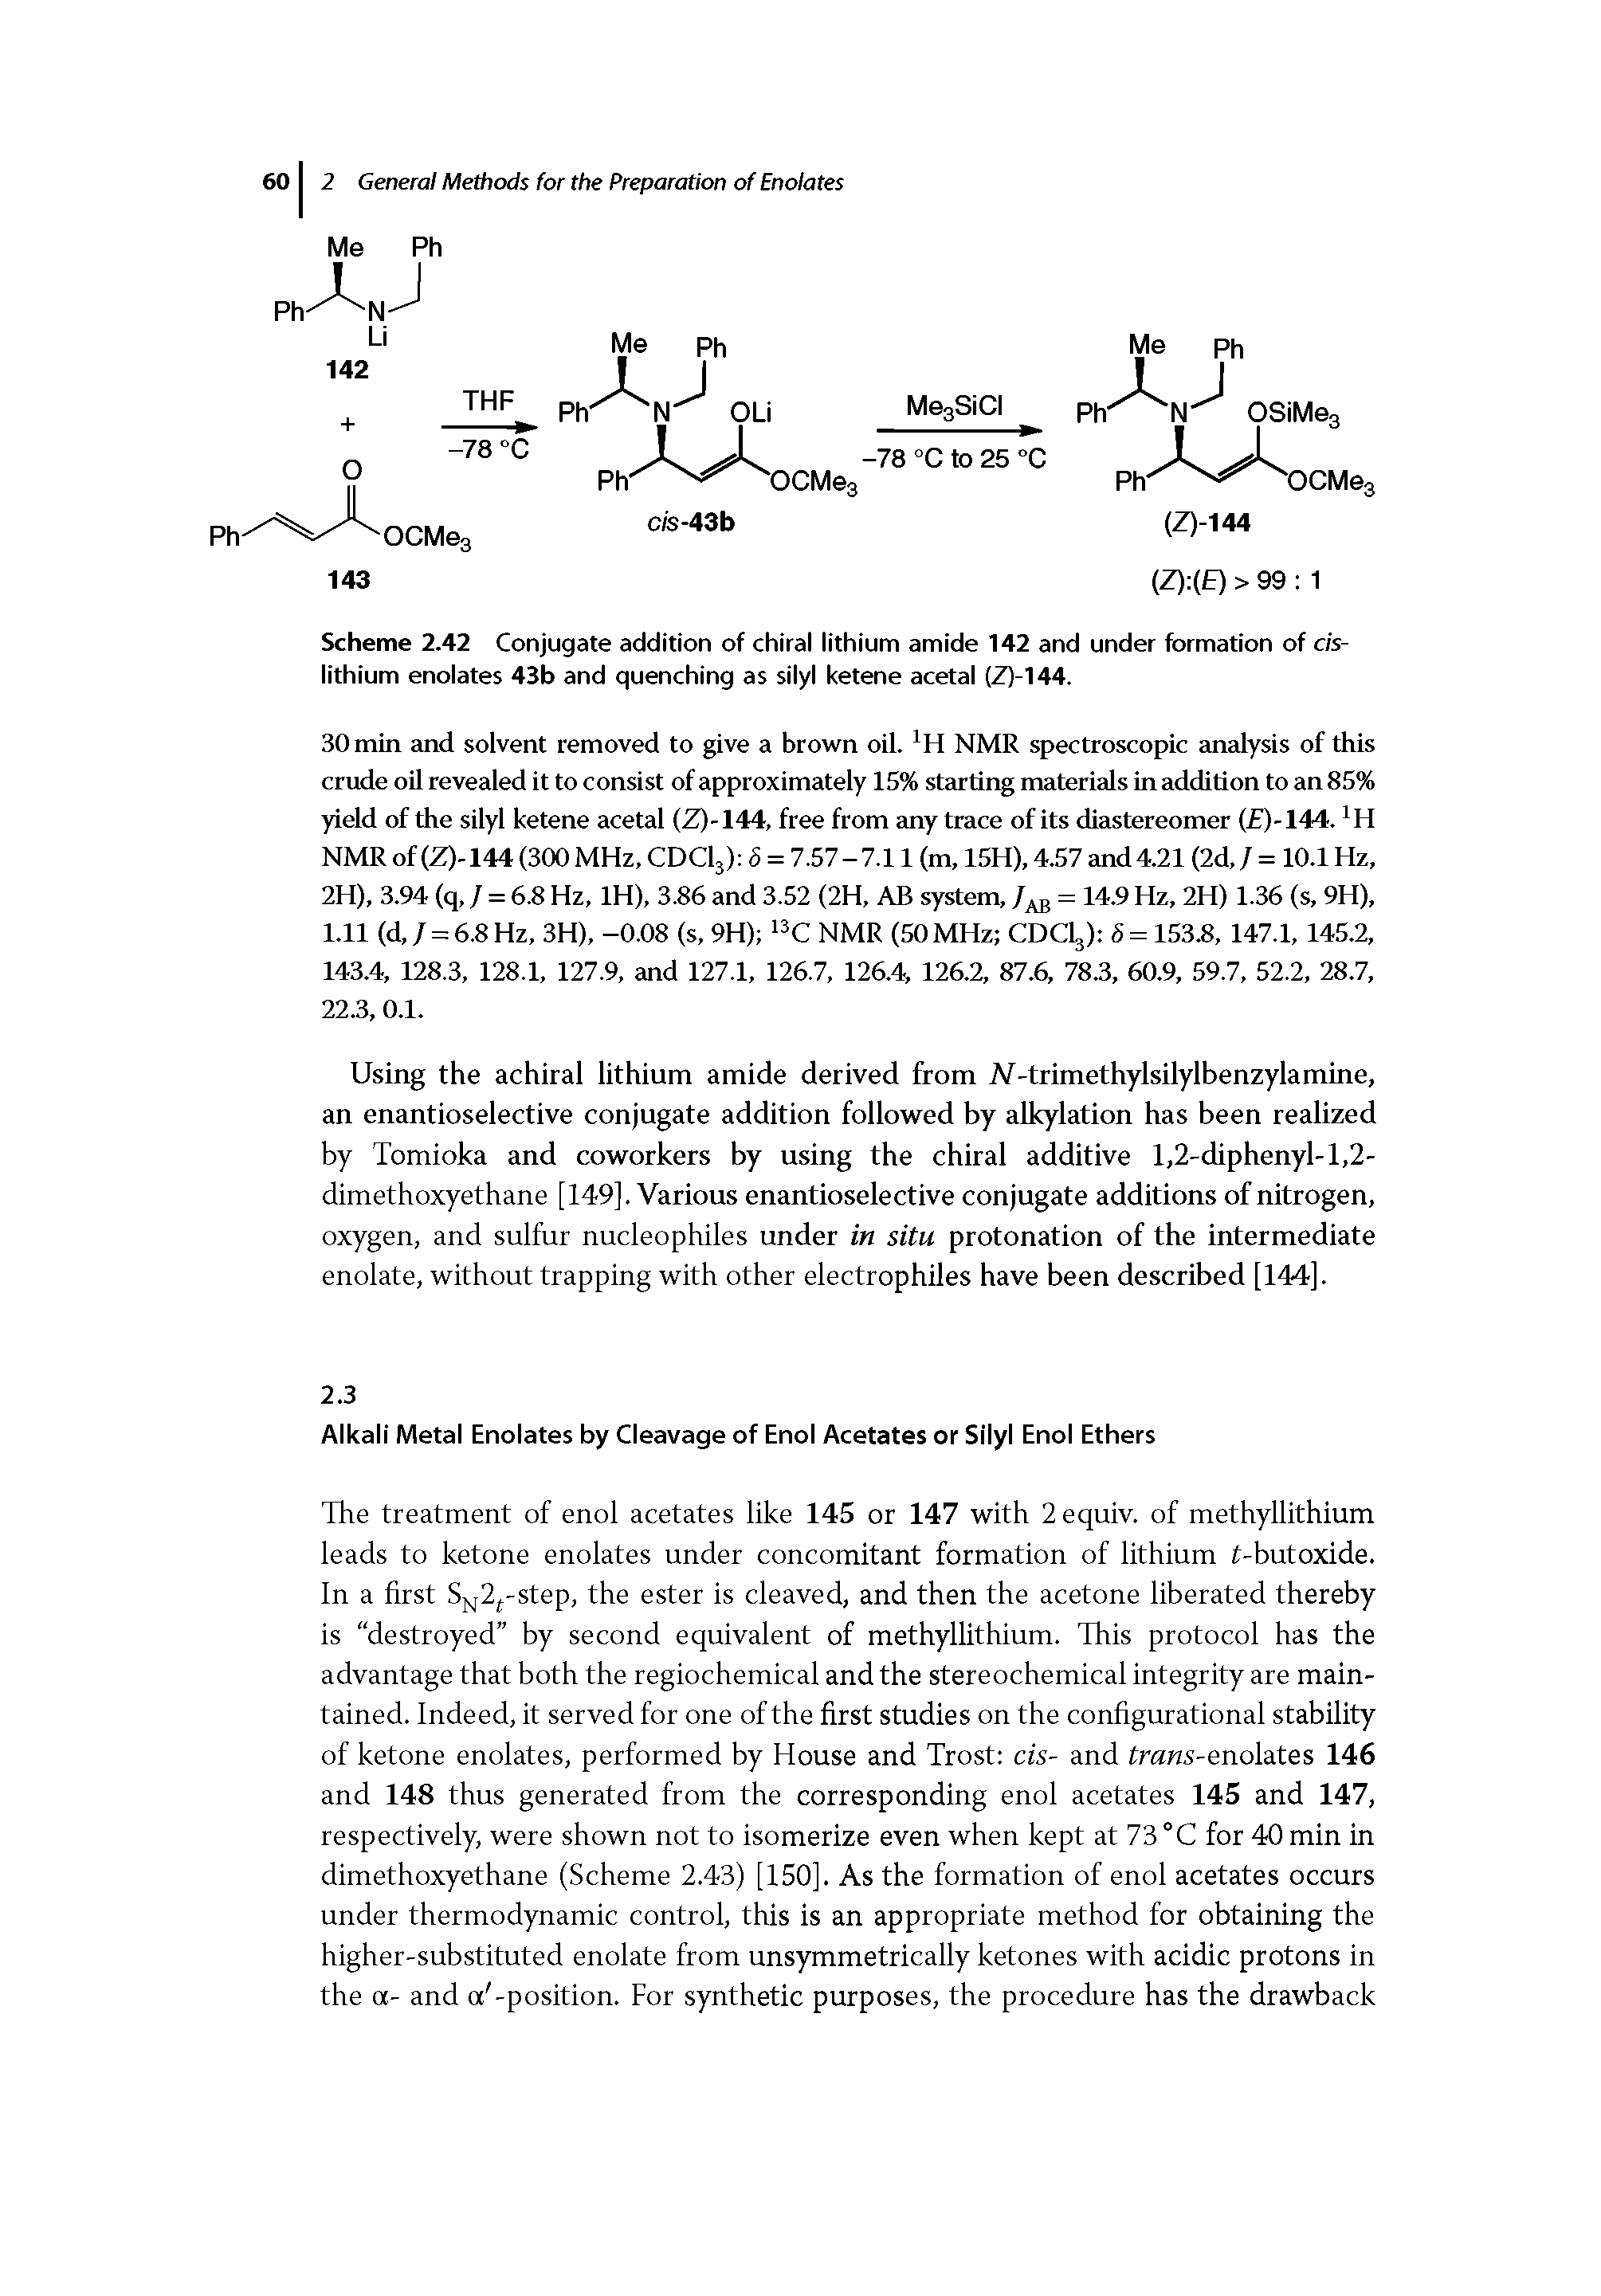 Scheme 2.42 Conjugate addition of chiral lithium amide 142 and under formation of c/s-lithium enolates 43b and quenching as silyl ketene acetal (Z)-144.